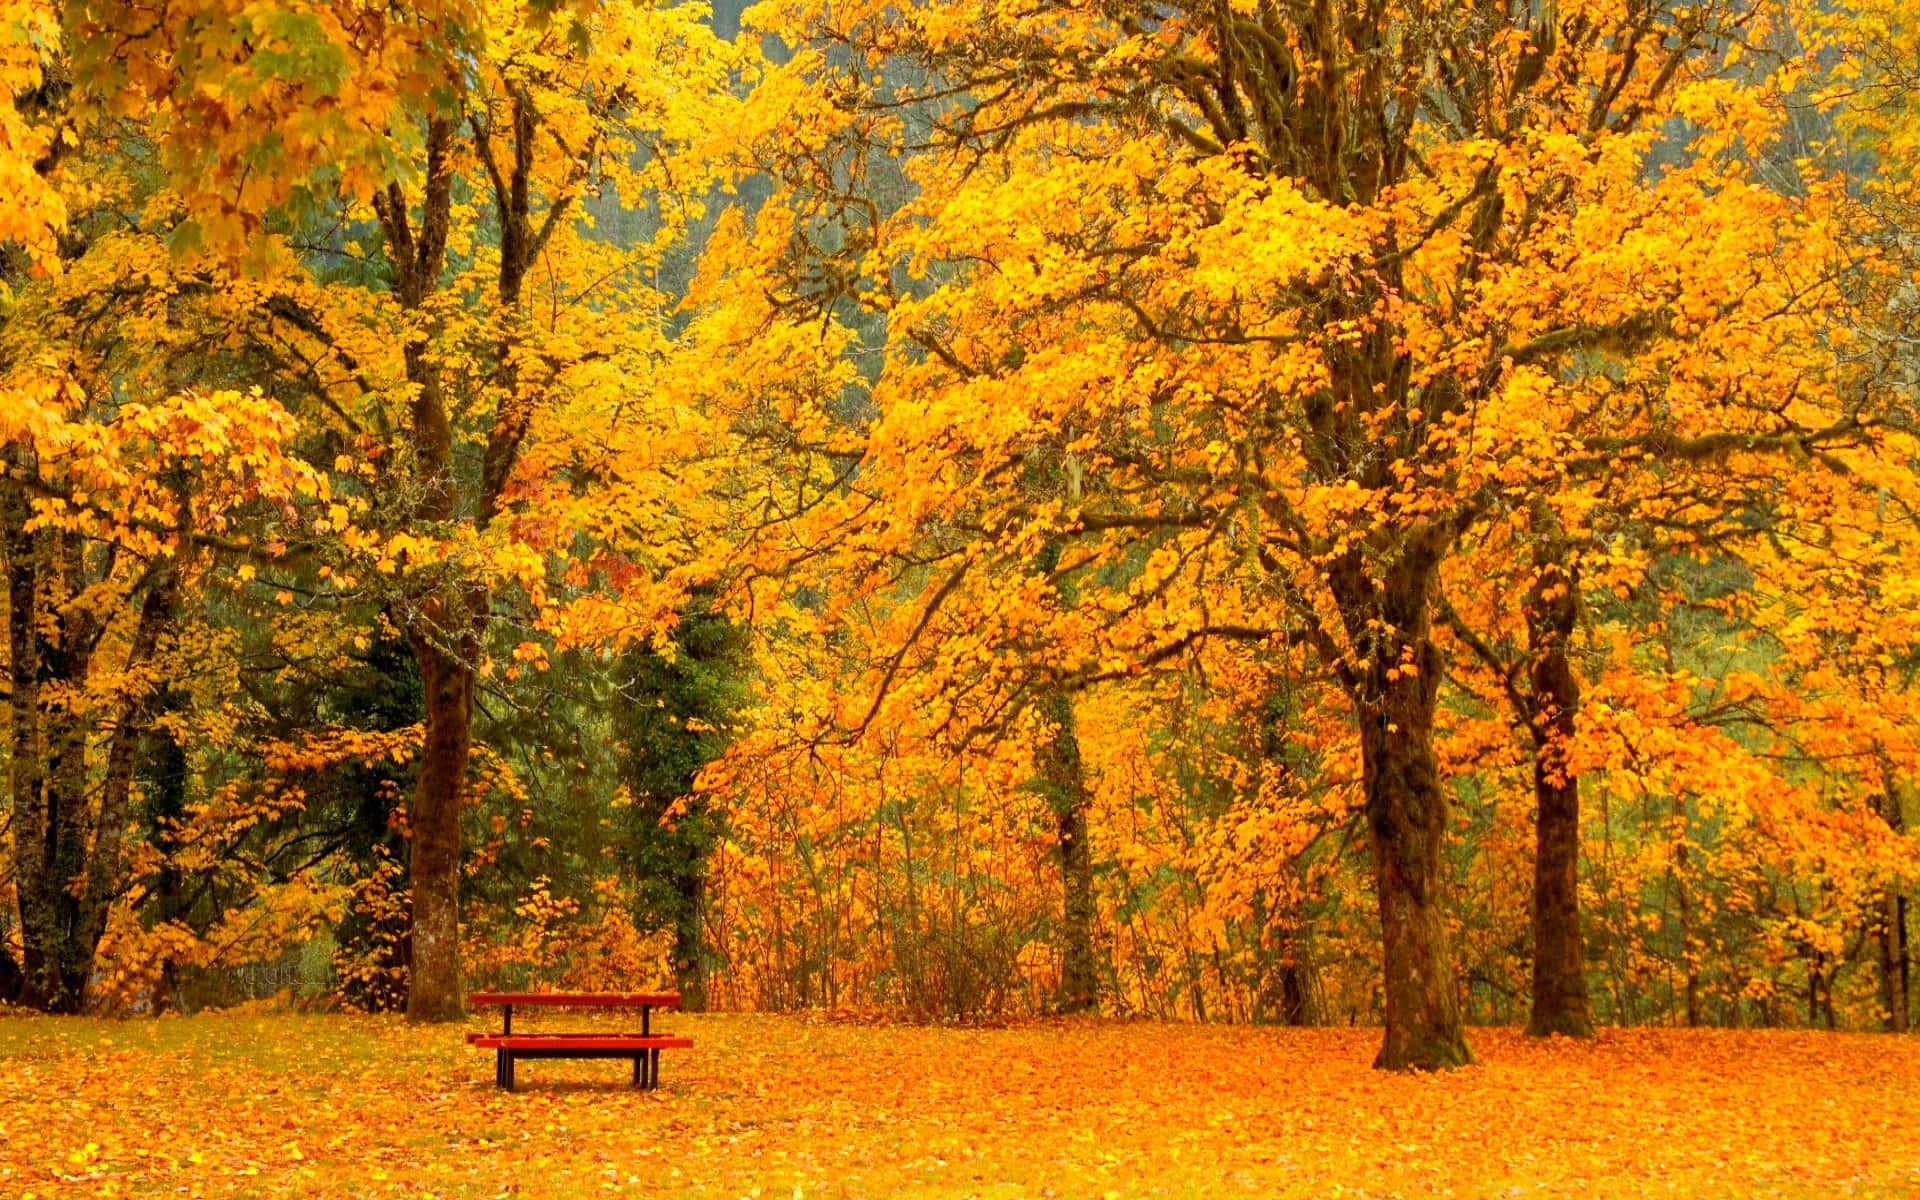 A golden view of vibrant fall foliage